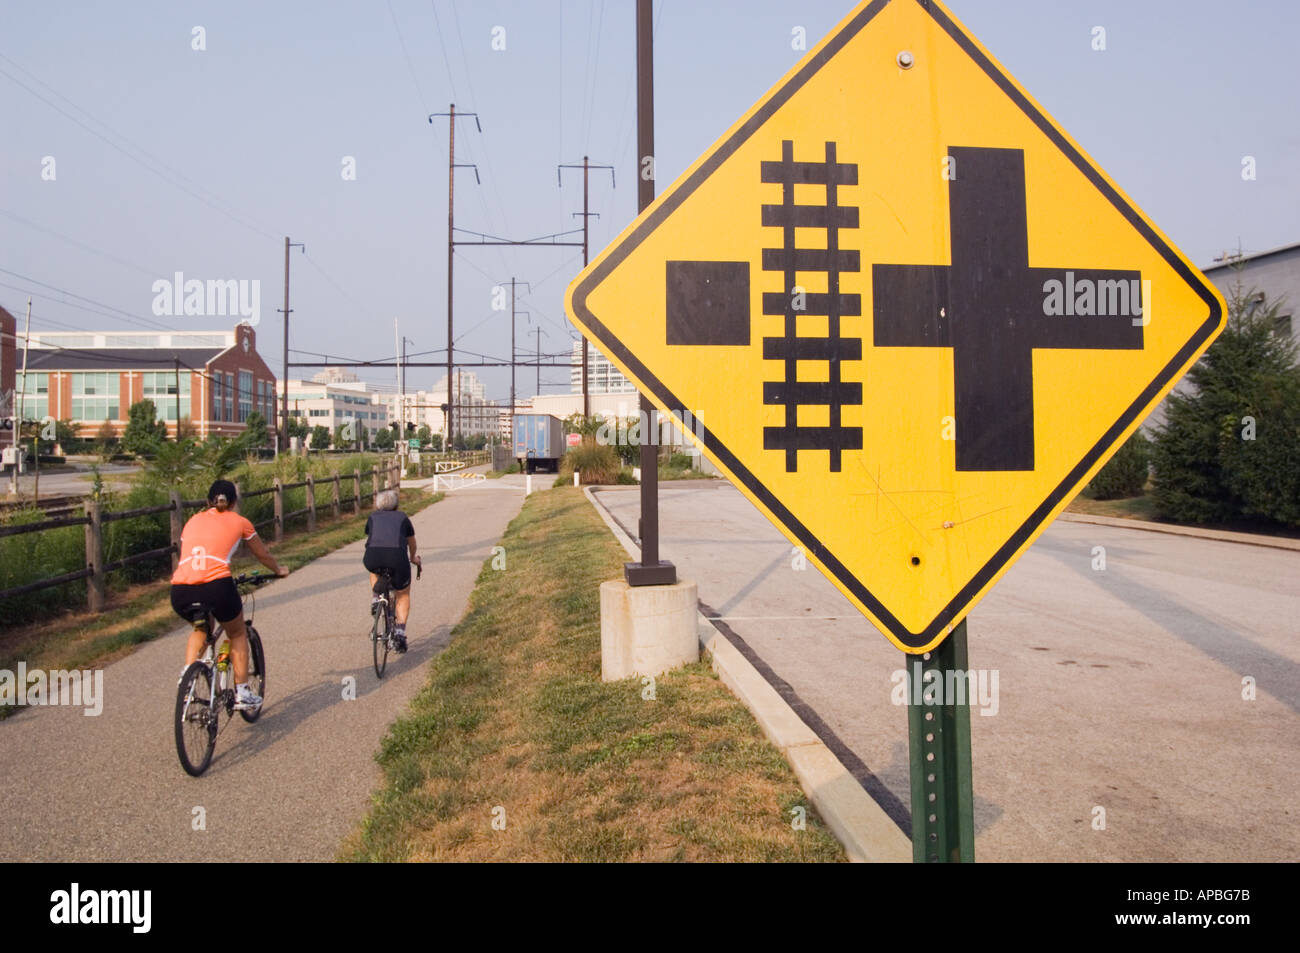 two cyclists on a rail trail riding away with a sign warning or railroad track hazard in foreground in Conshohocken Pennsylvania Stock Photo